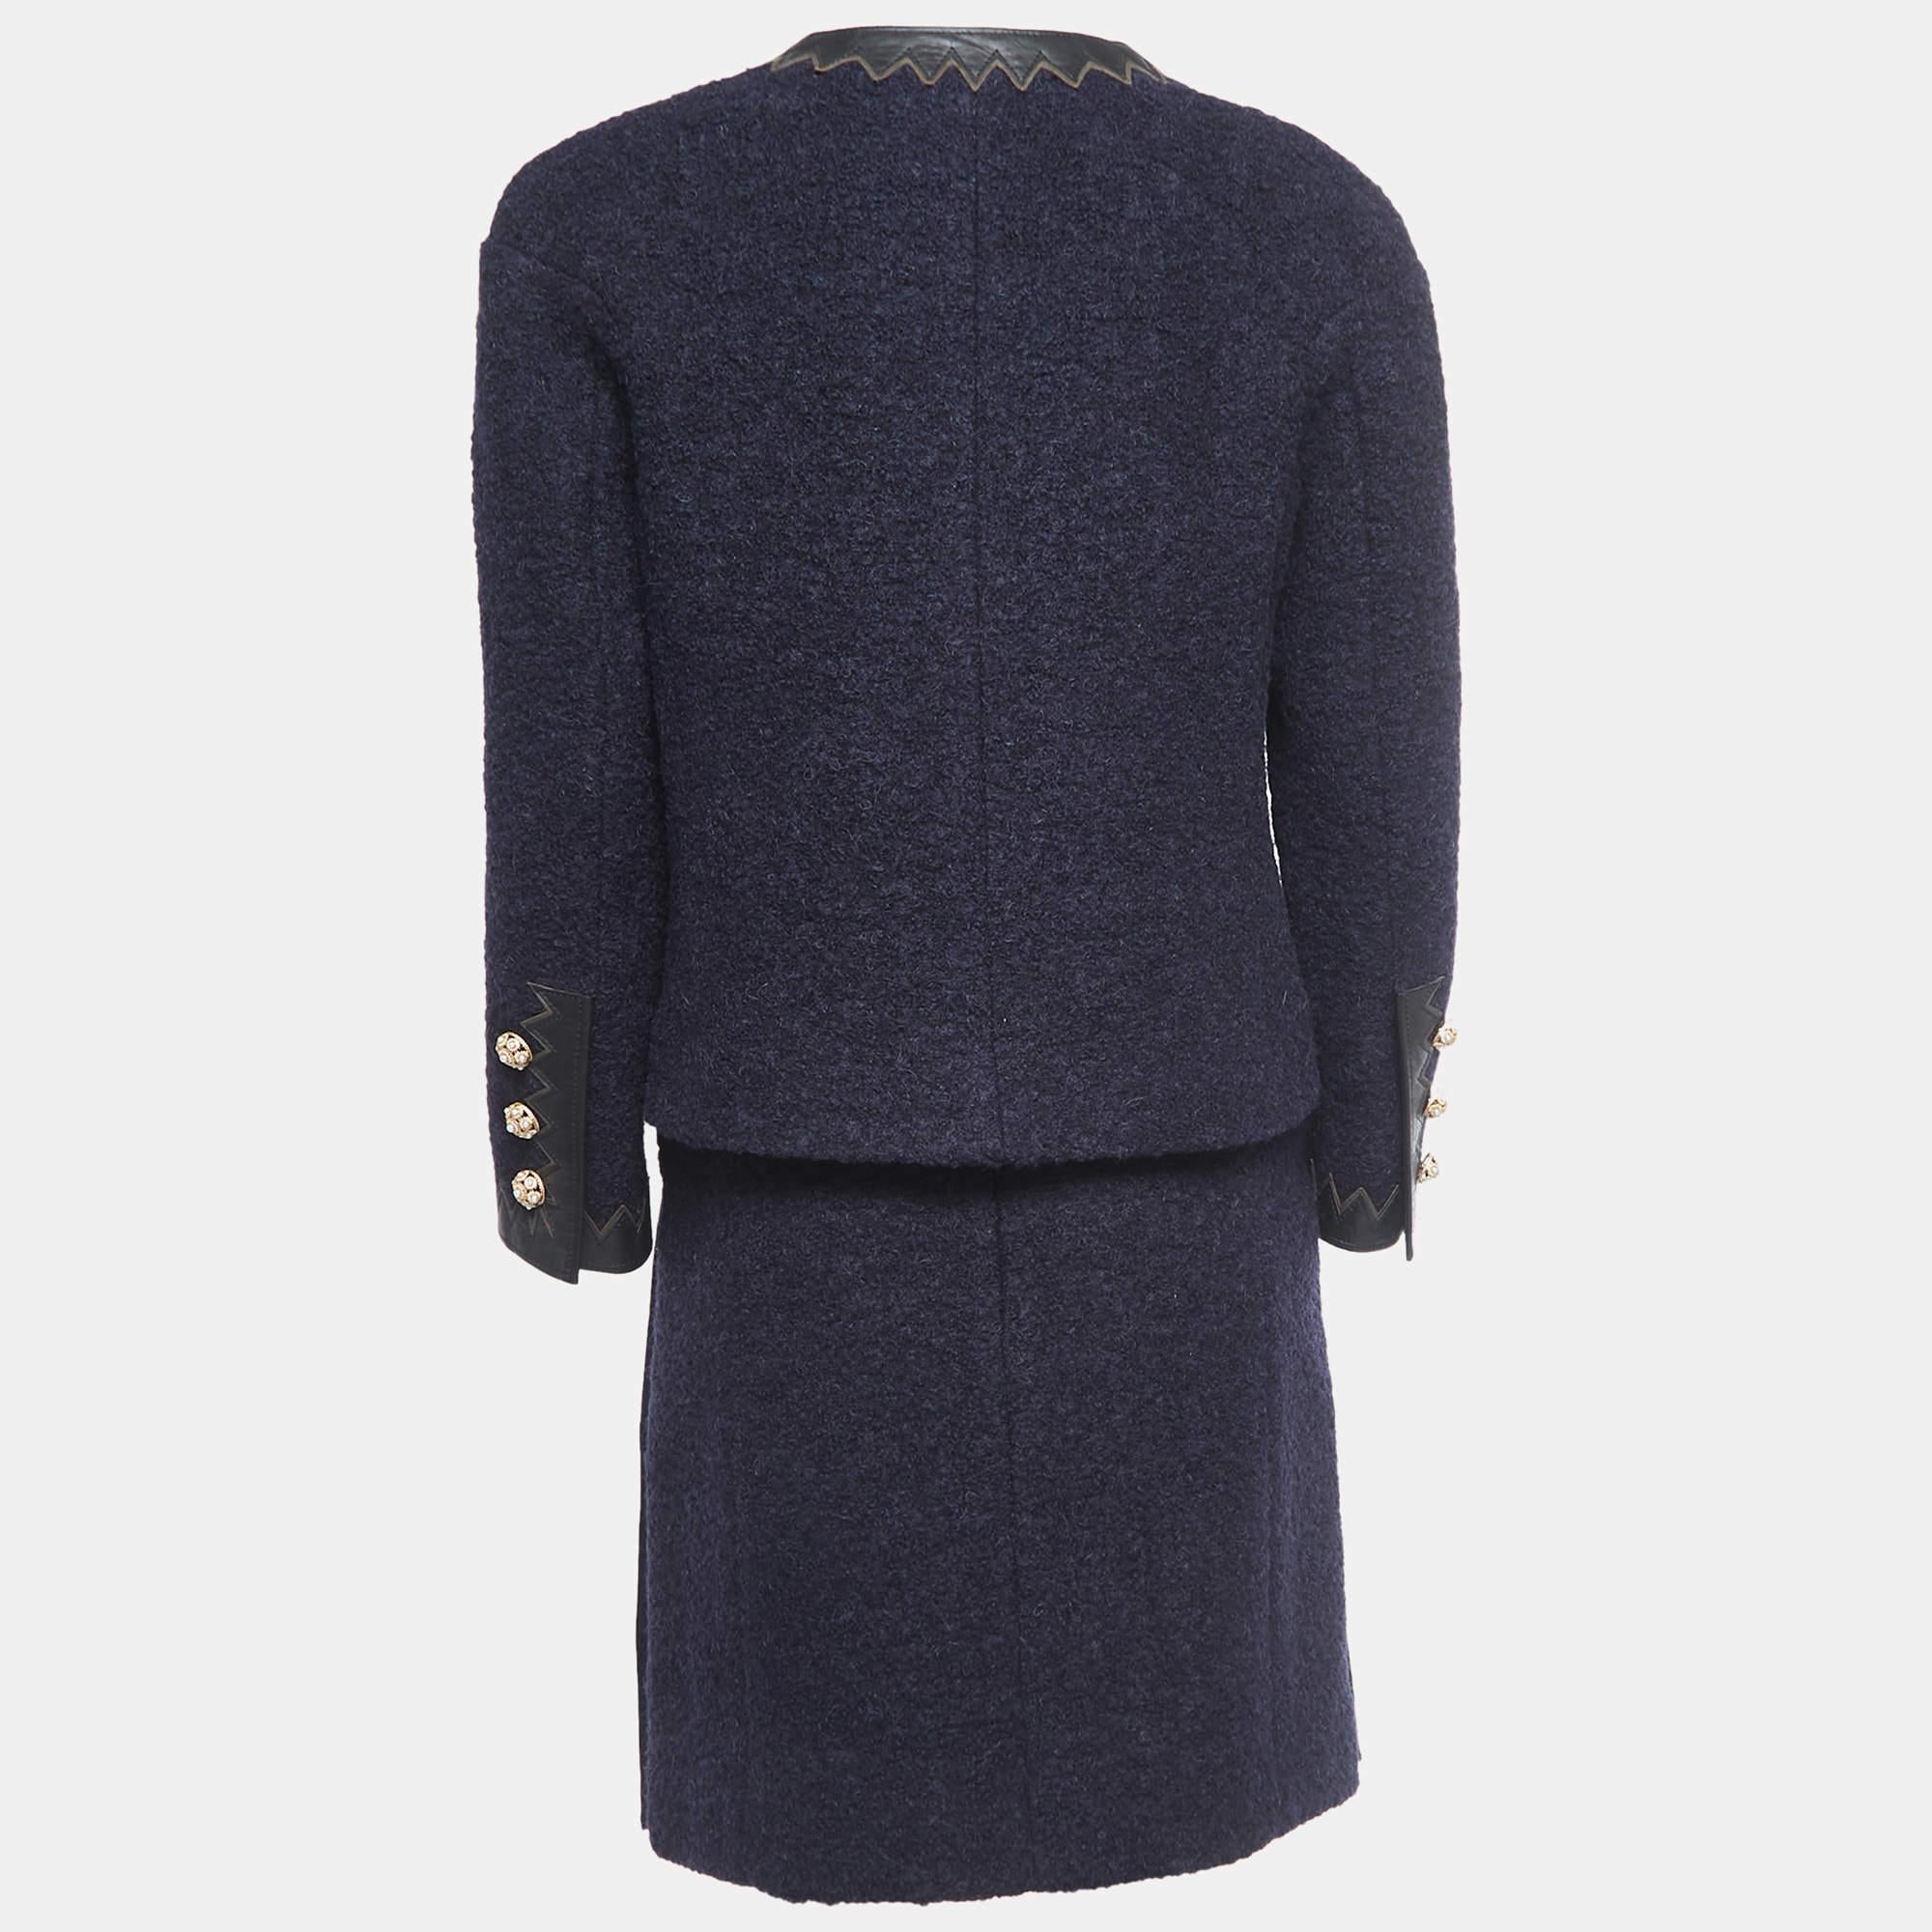 Characterized by impeccable tailoring, a good fit, and the use of silk and lambskin, this Chanel wool skirt suit will help you serve stylish looks. Style the set with heels or flats for max appeal.

